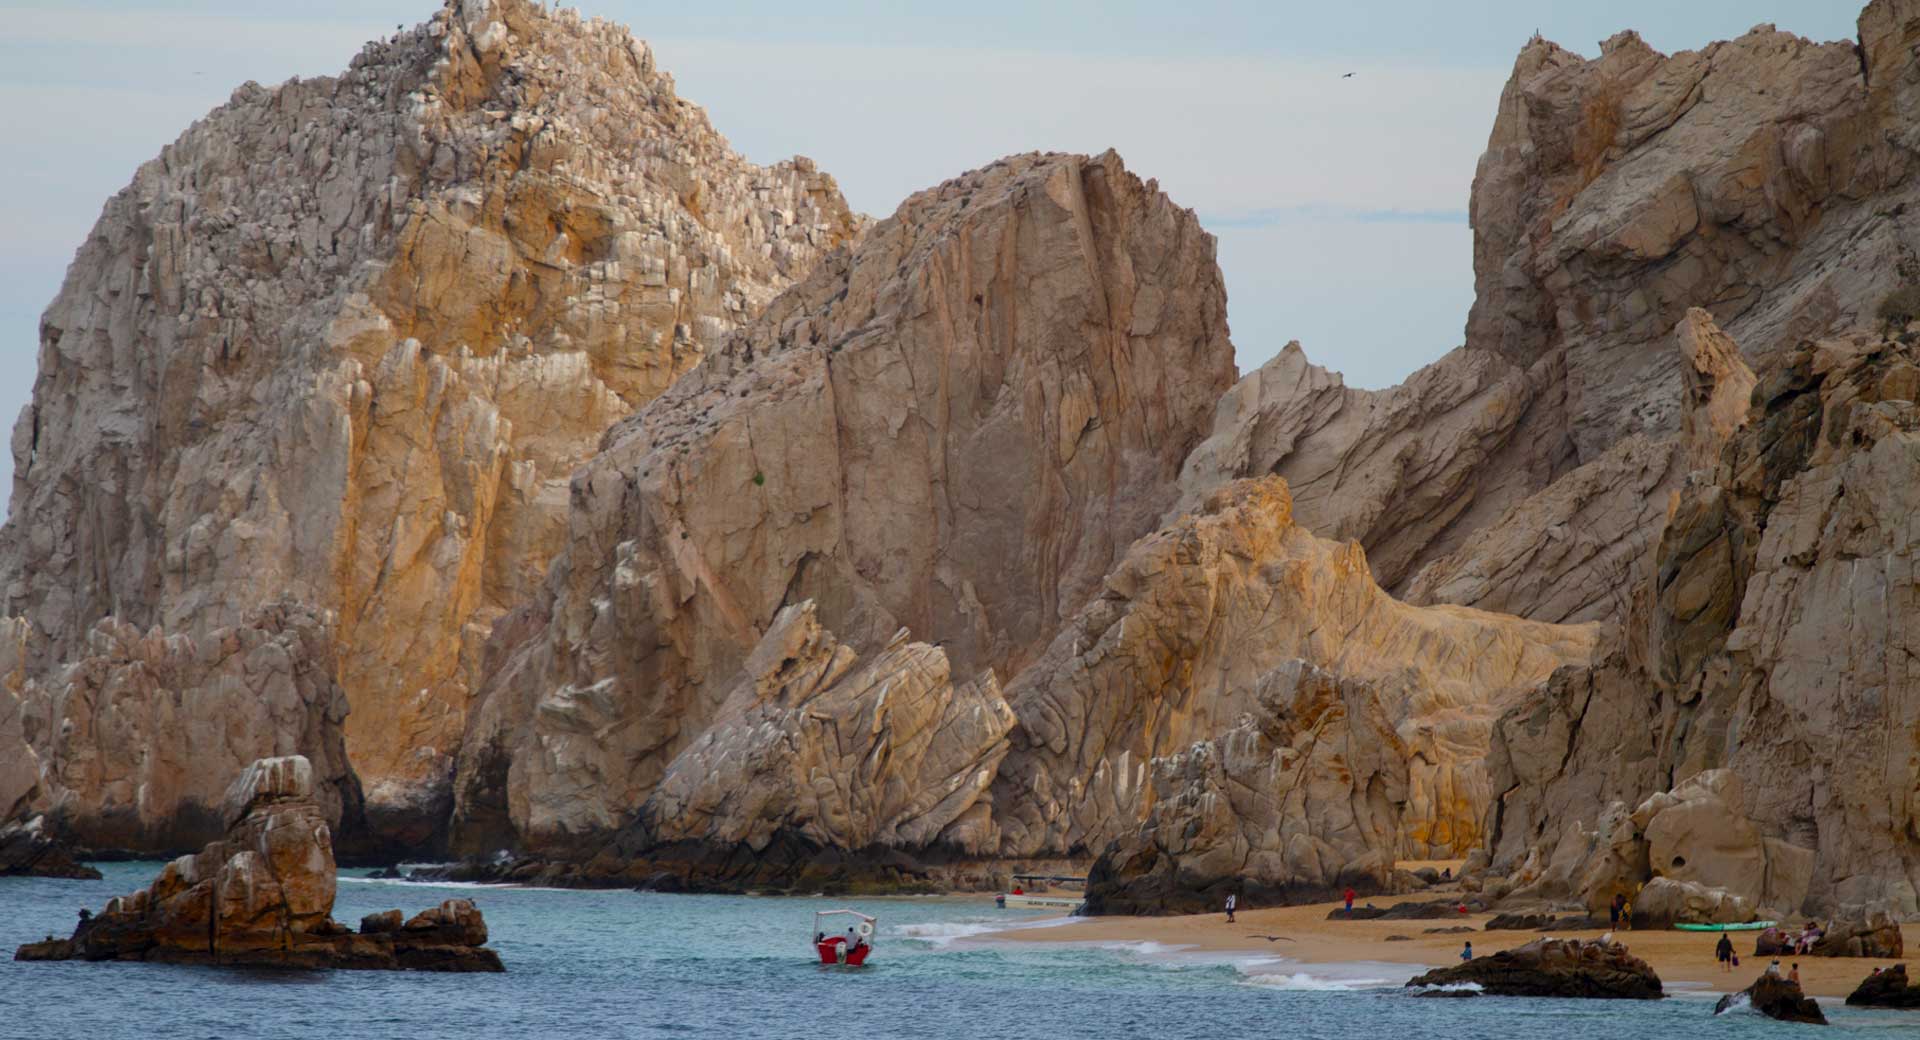 Parasailing along the rugged cliffs in Cabo